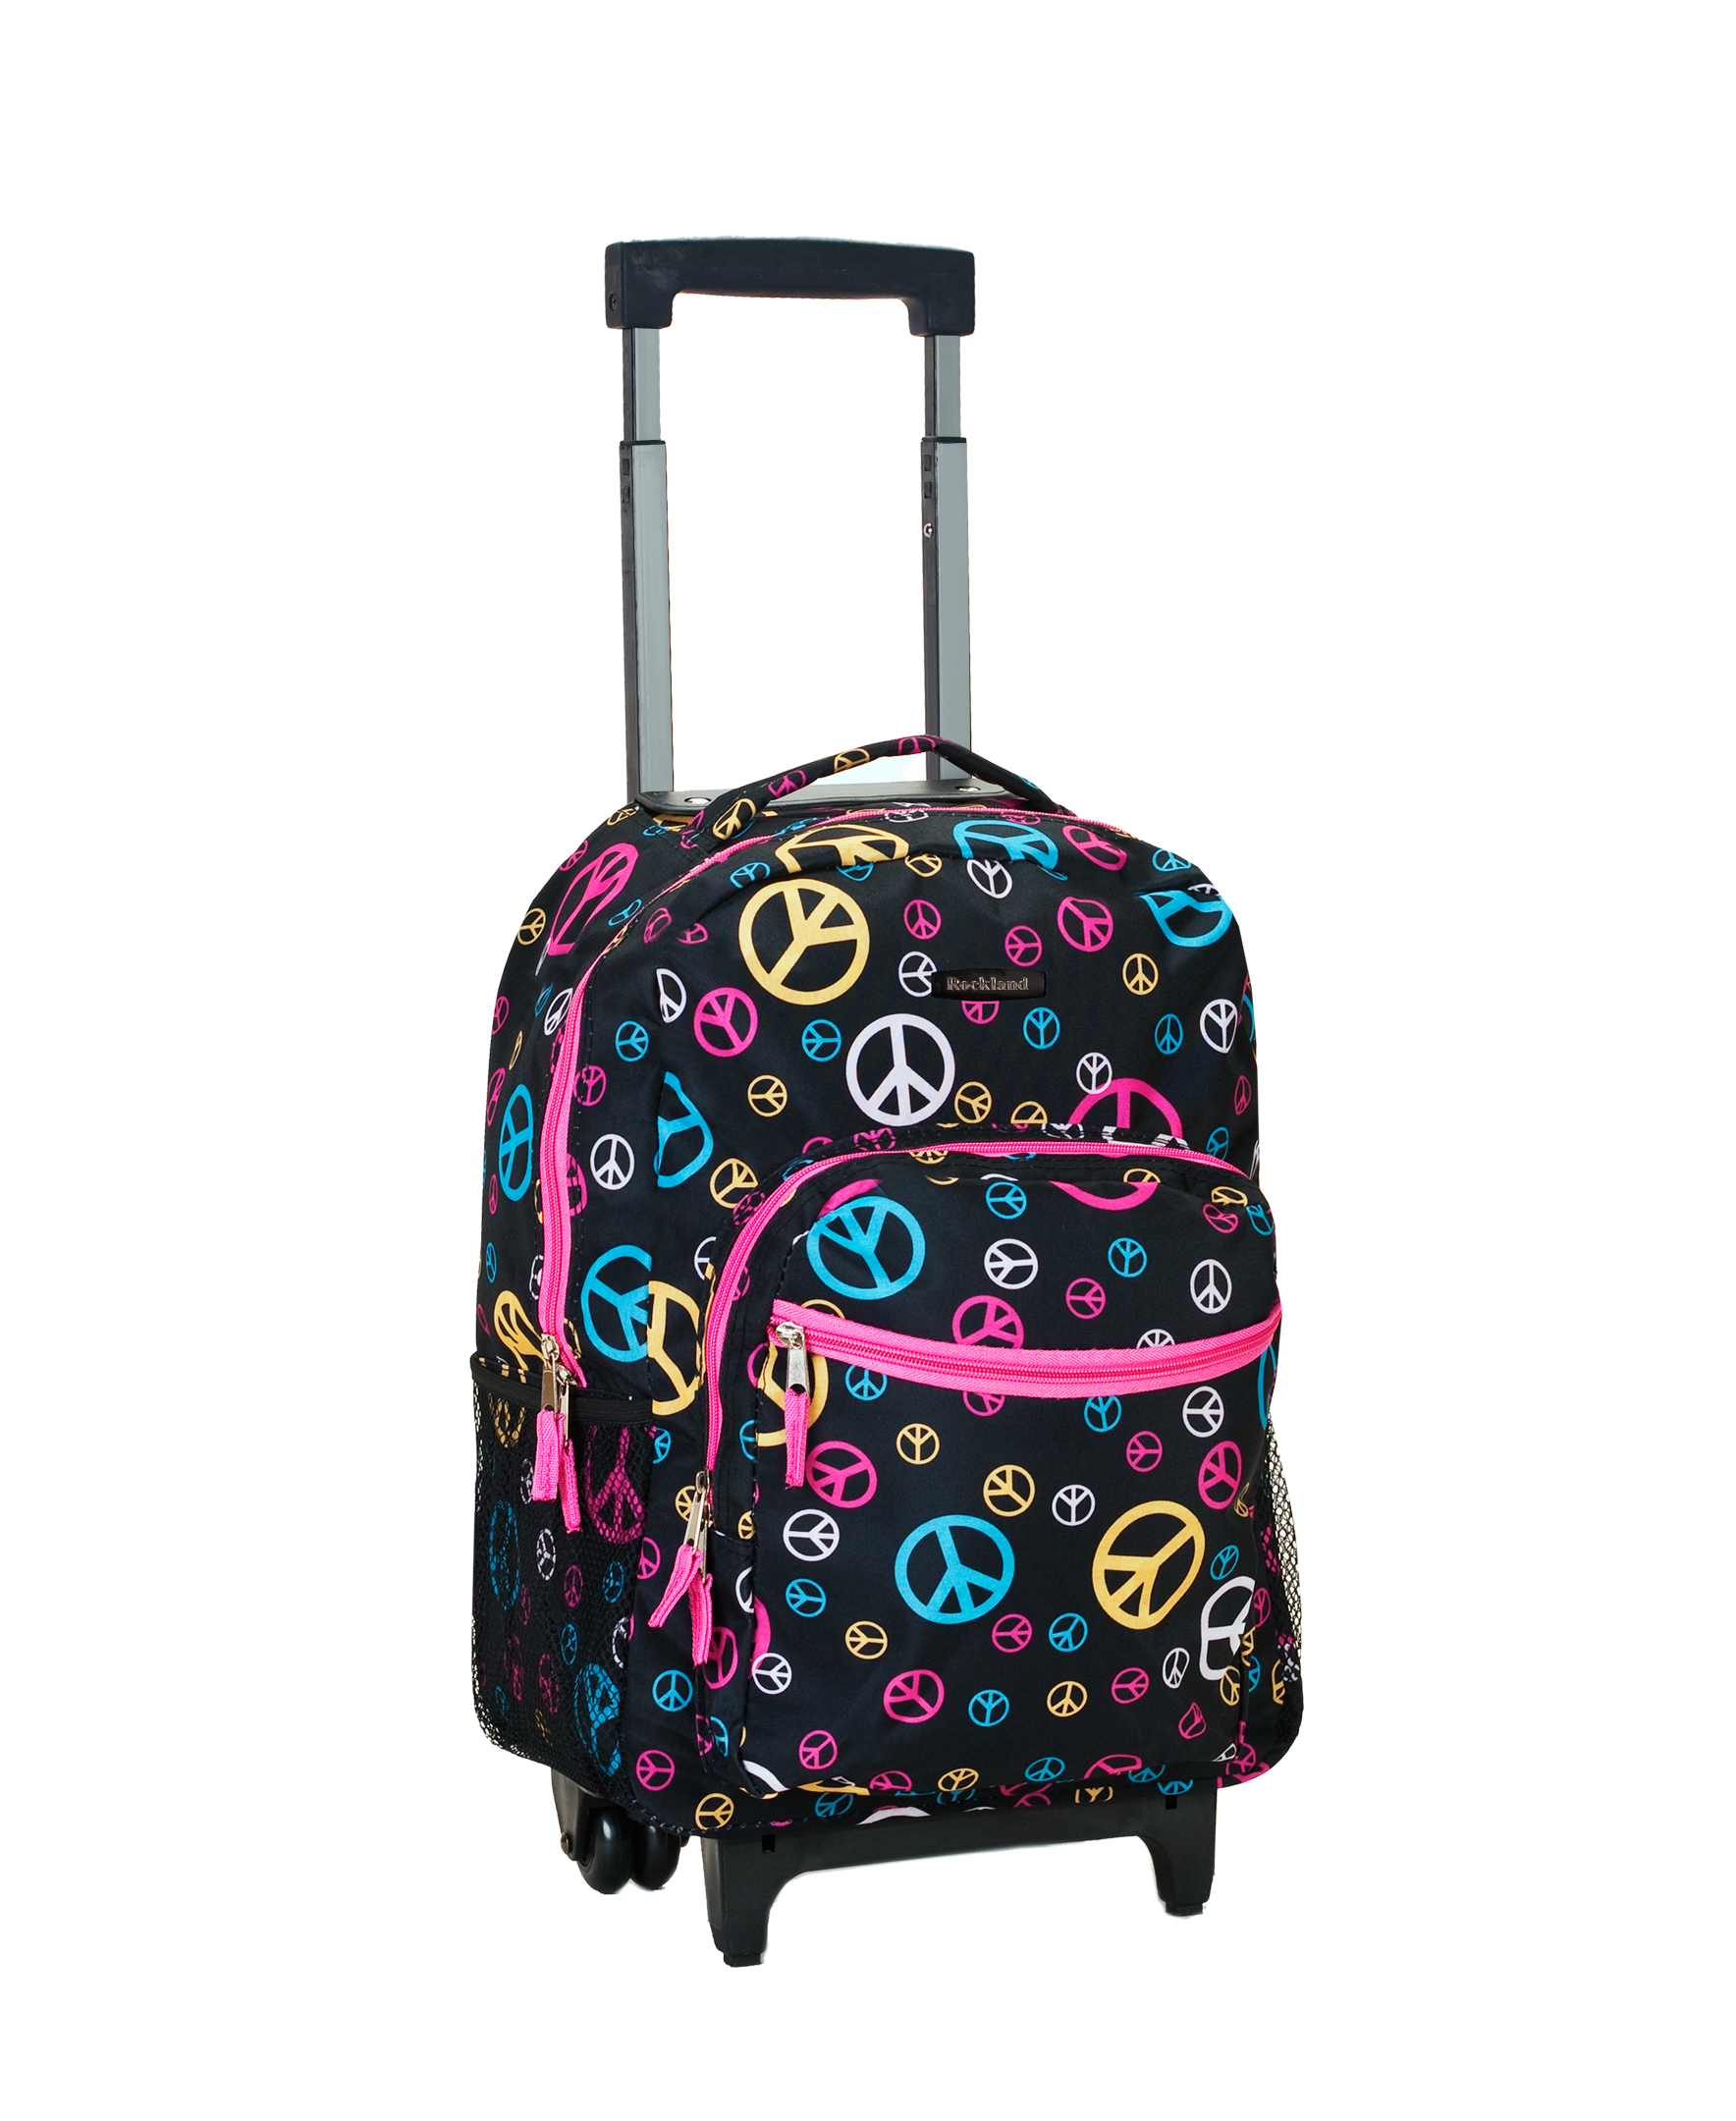 Rockland Unisex Luggage 17" Rolling Backpack R01 Peace - image 1 of 6